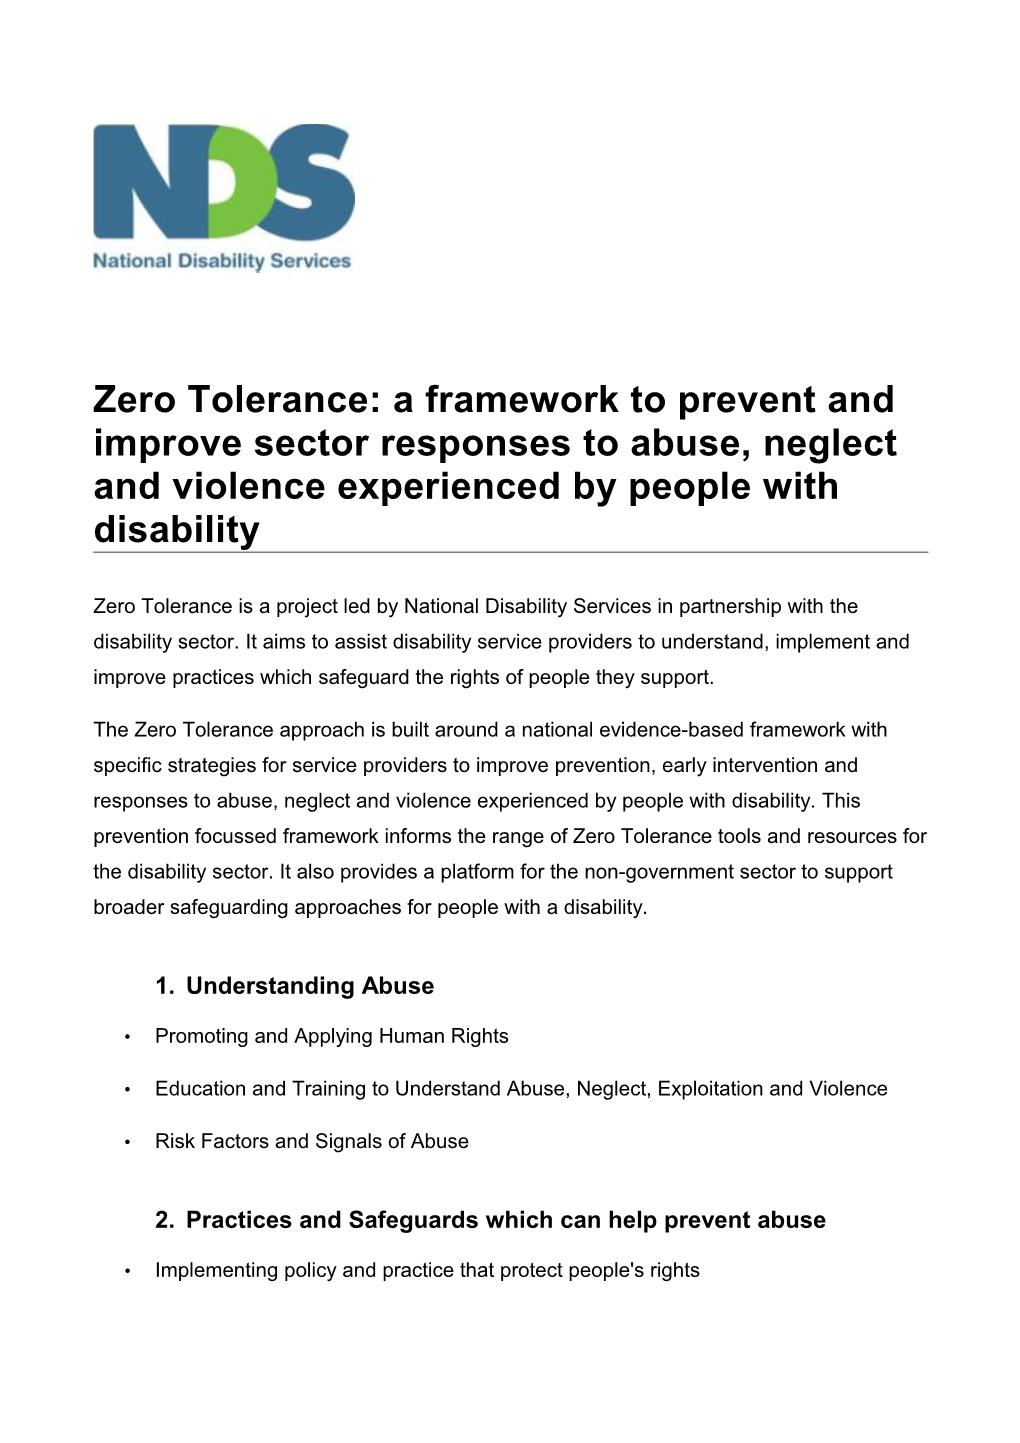 Zero Tolerance: a Framework to Prevent and Improve Sector Responses to Abuse, Neglect And